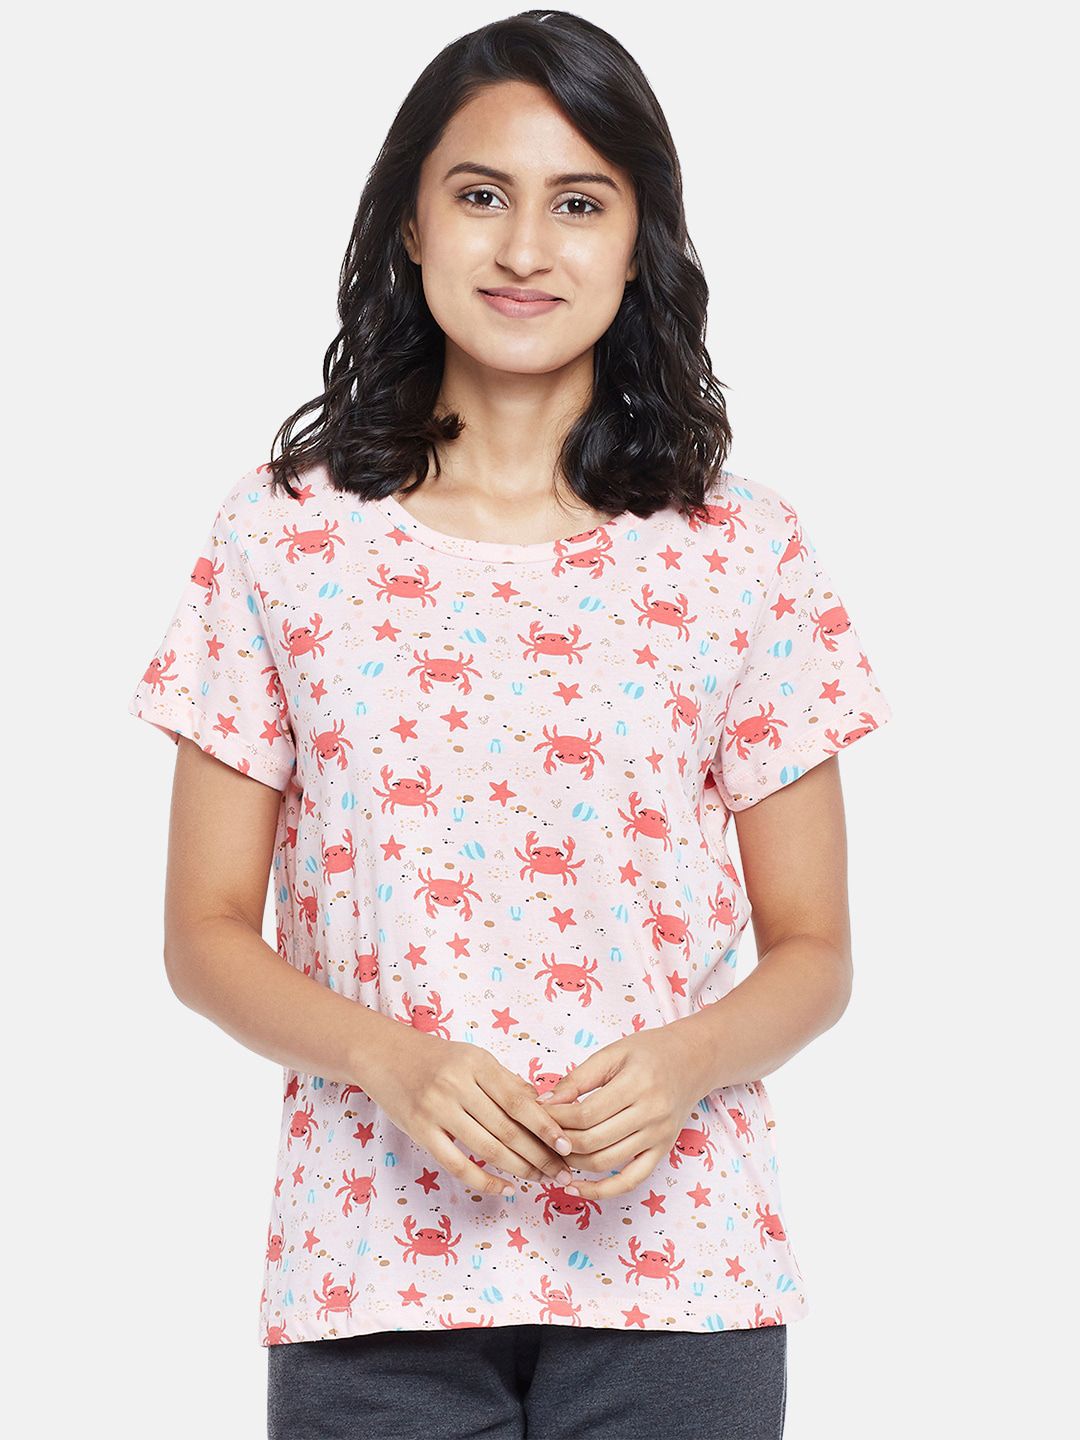 Dreamz by Pantaloons Women Pink & Blue Printed Cotton Lounge T-shirt Price in India